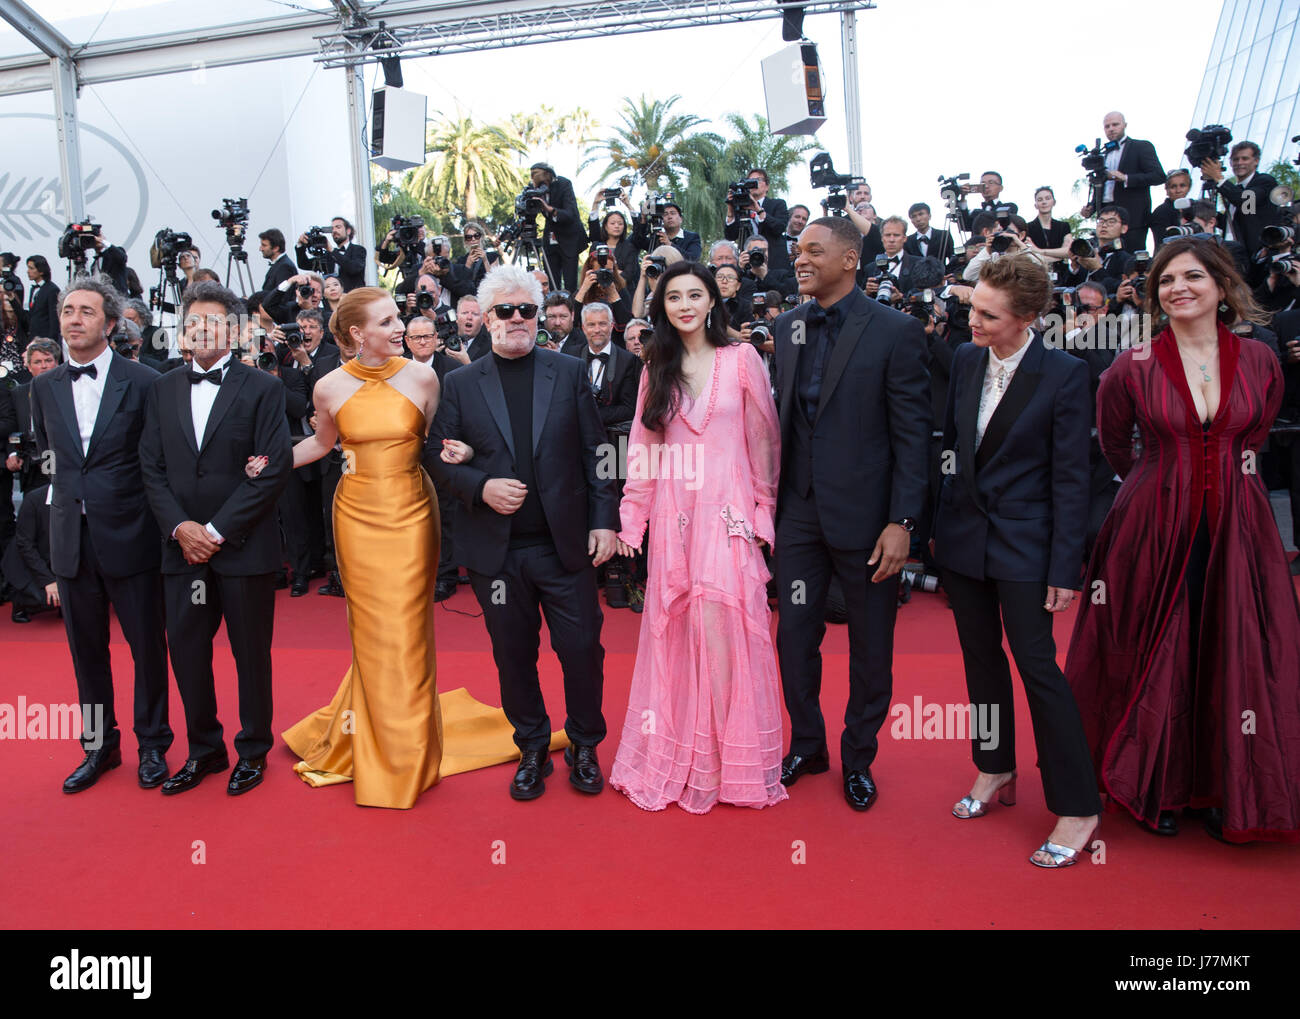 Cannes, France. 23rd May, 2017Jury members of the 70th Cannes International Film Festival Agnes Jaoui, Maren Ade, Will Smith, Fan Bingbing, Pedro Almodovar, Jessica Chastain, Gabriel Yared, Paolo Sorrentino (R-L) attend the '70th Anniversary' ceremony of the Cannes Film Festival in Cannes, France, May 23, 2017. (Xinhua/Xu Jinquan) (jmmn) Credit: Xinhua/Alamy Live News Stock Photo